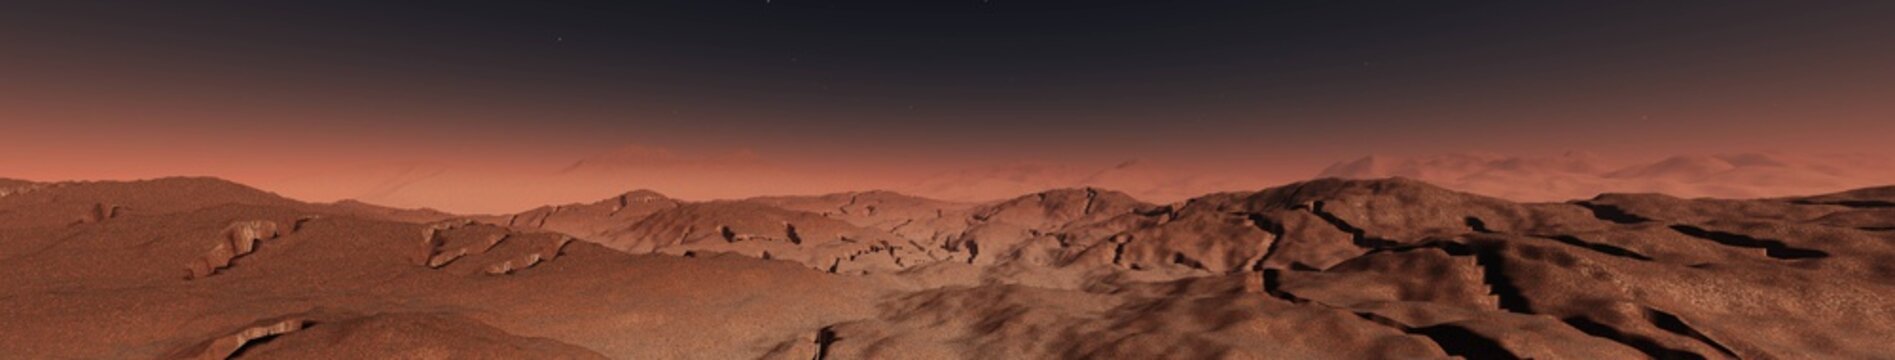 Panorama of Mars. Sunset on Mars. Martian surface.
3D rendering
